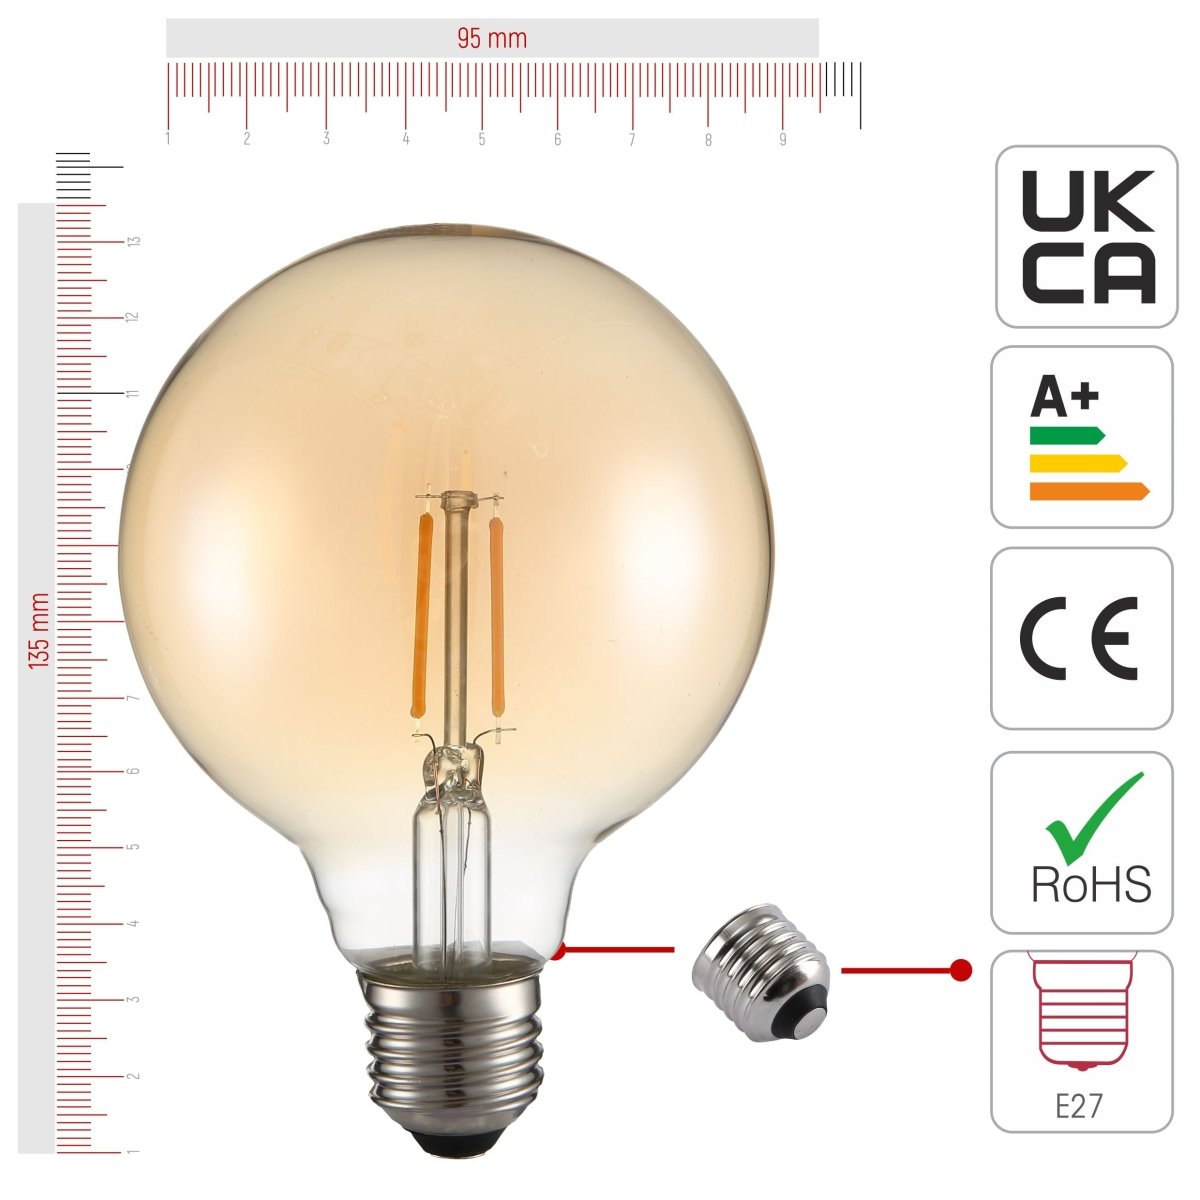 Size and certifications of LED Filament Bulb G95 Globe E27 Edison Screw 2W 220lm Warm White 2400K Amber